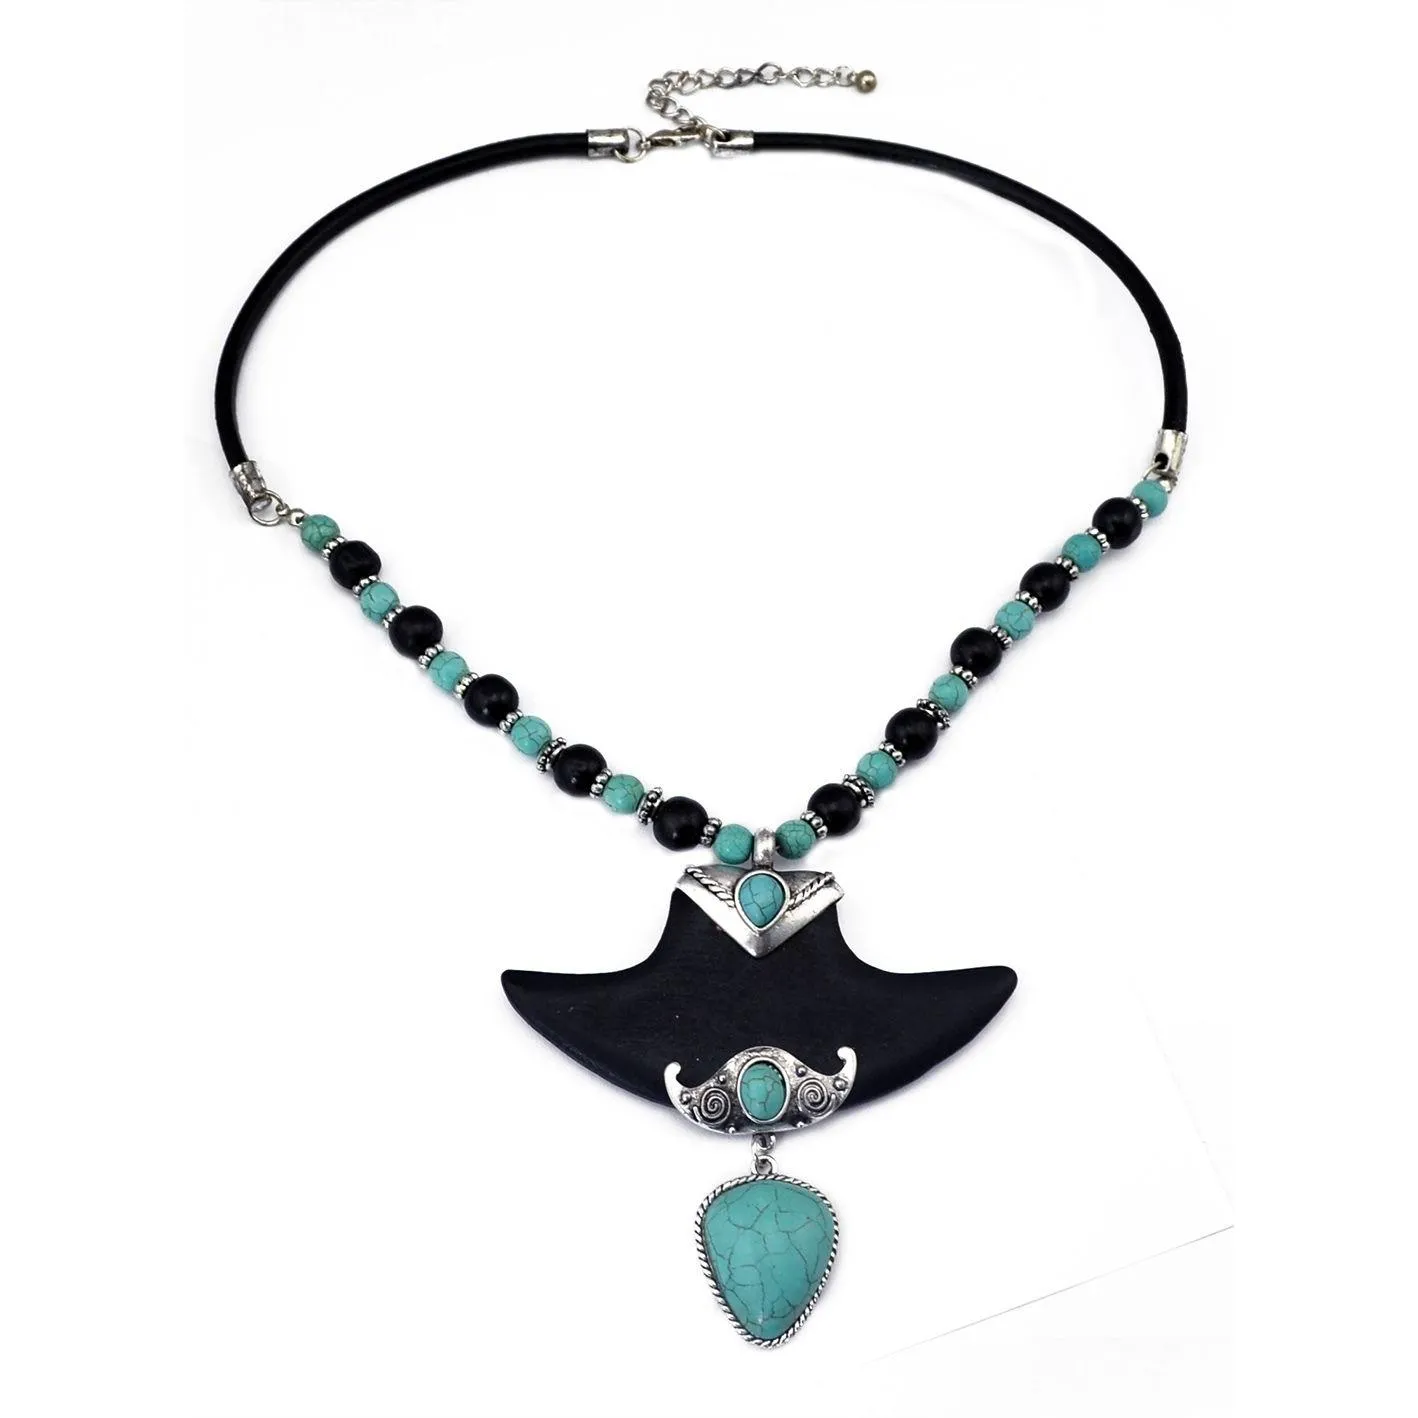 Bohemian Vintage Silver Gold Plated Leather Chain Turquoise Collar Choker Necklace for Women